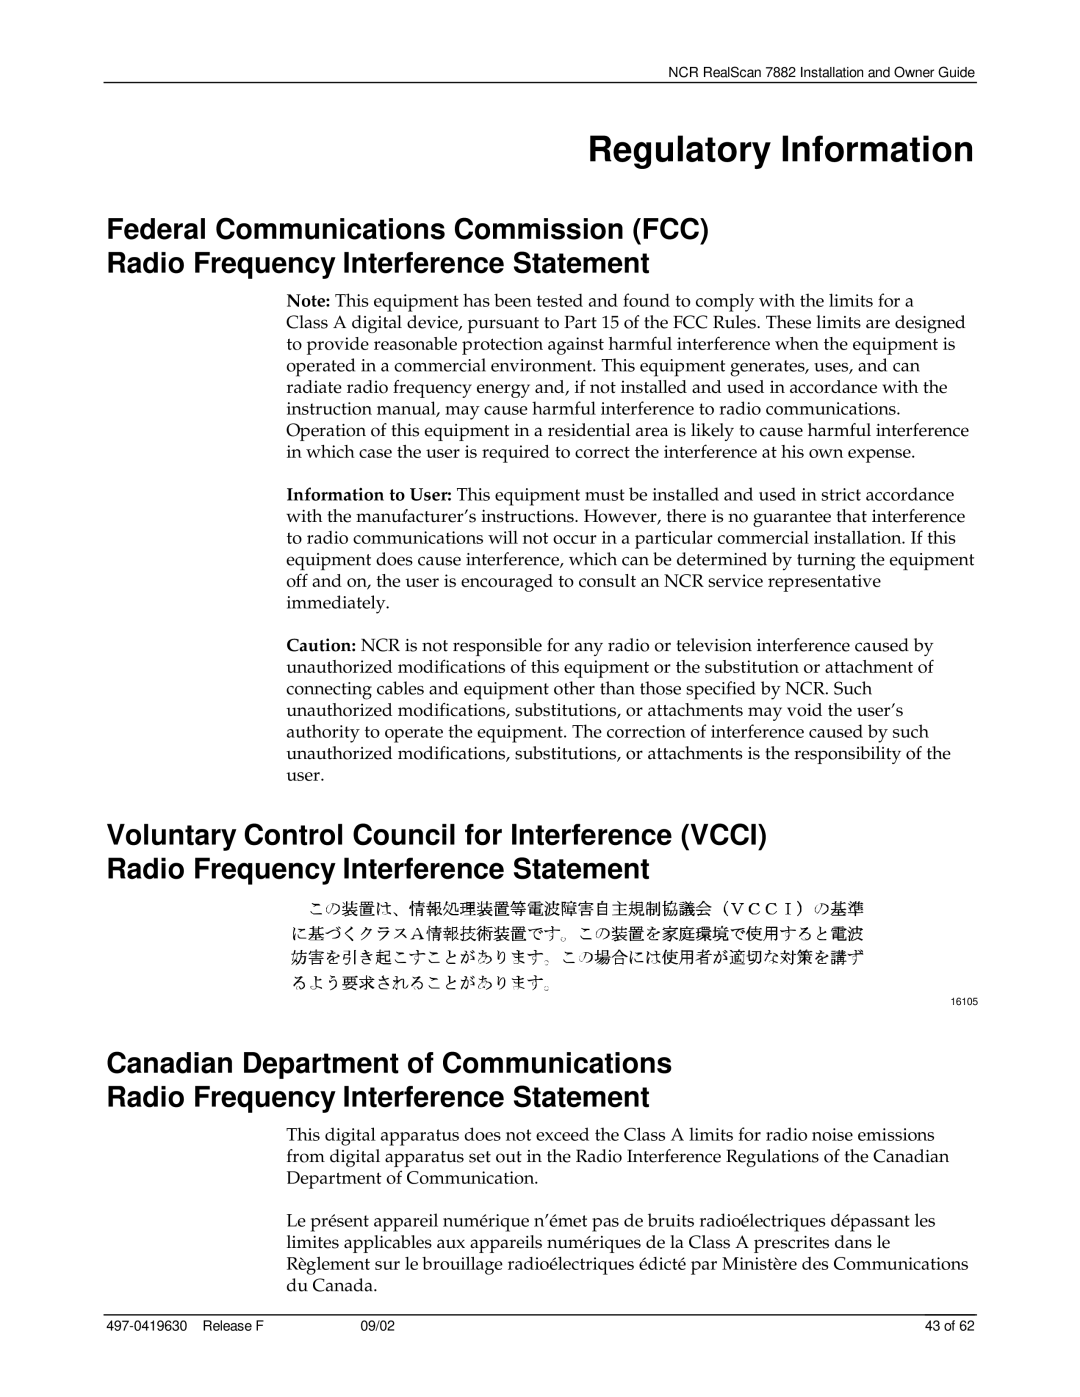 NCR 7882 manual Regulatory Information, Federal Communications Commission FCC, Radio Frequency Interference Statement 